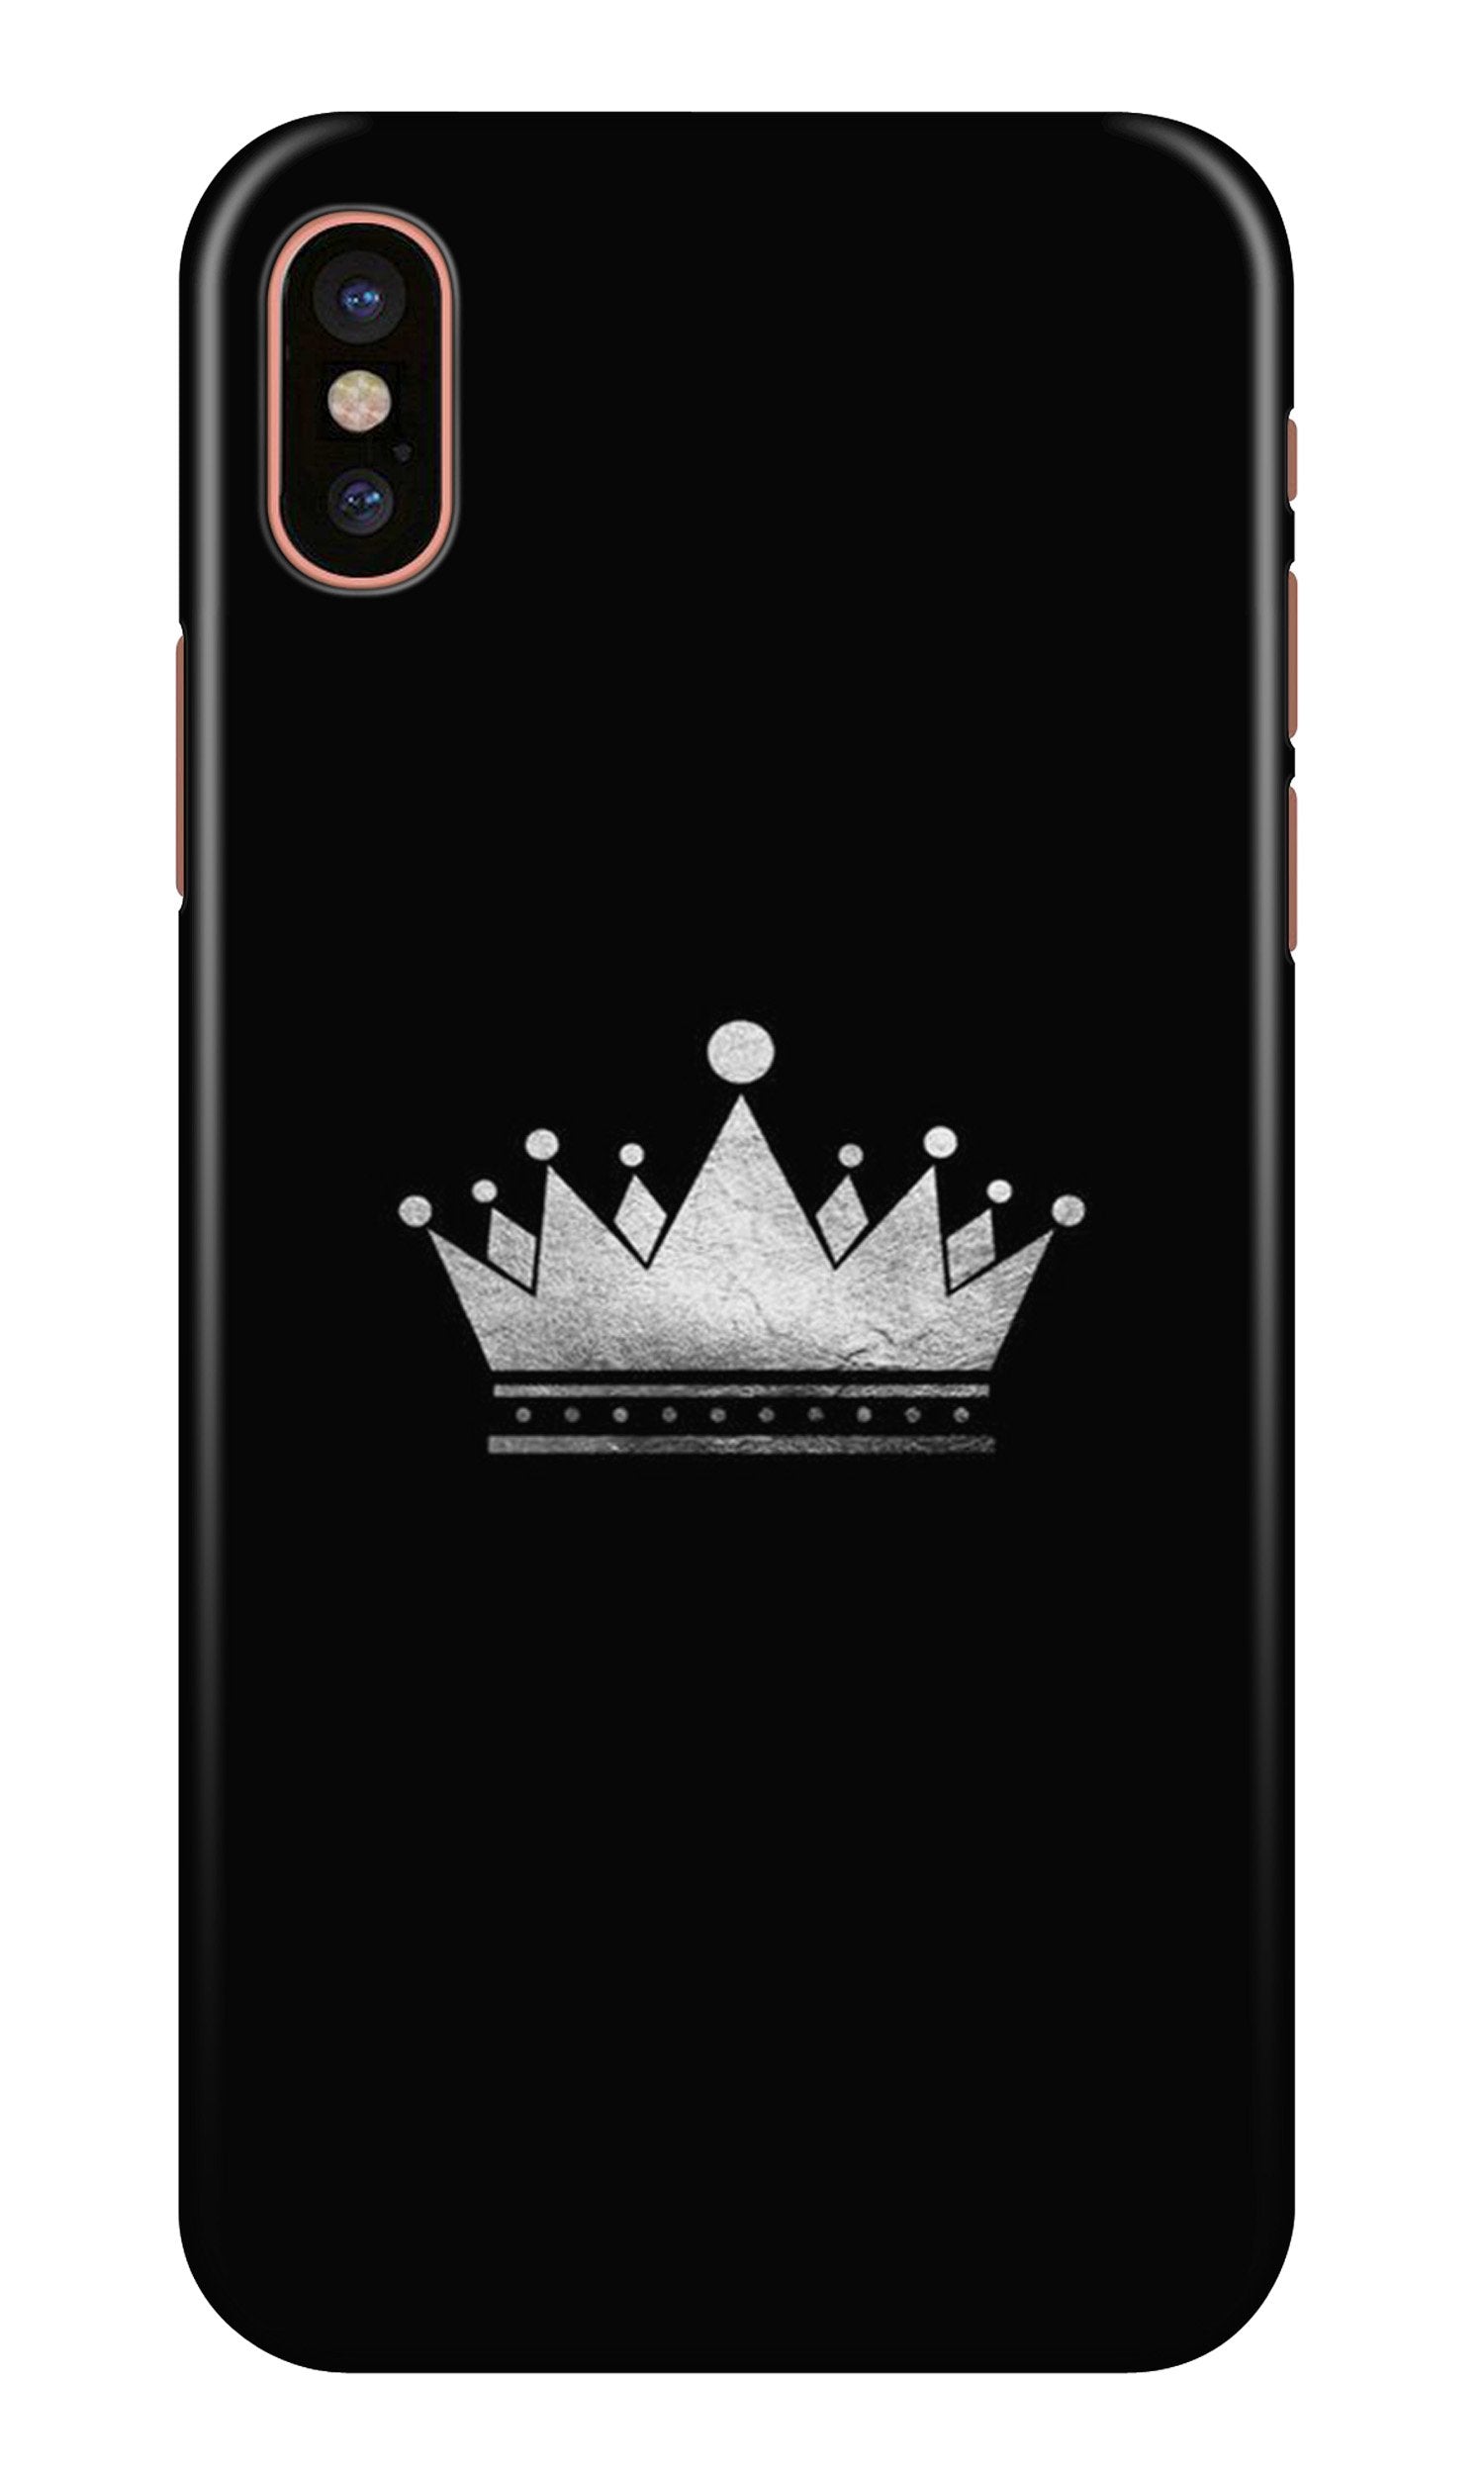 King Case for iPhone Xs Max (Design No. 280)